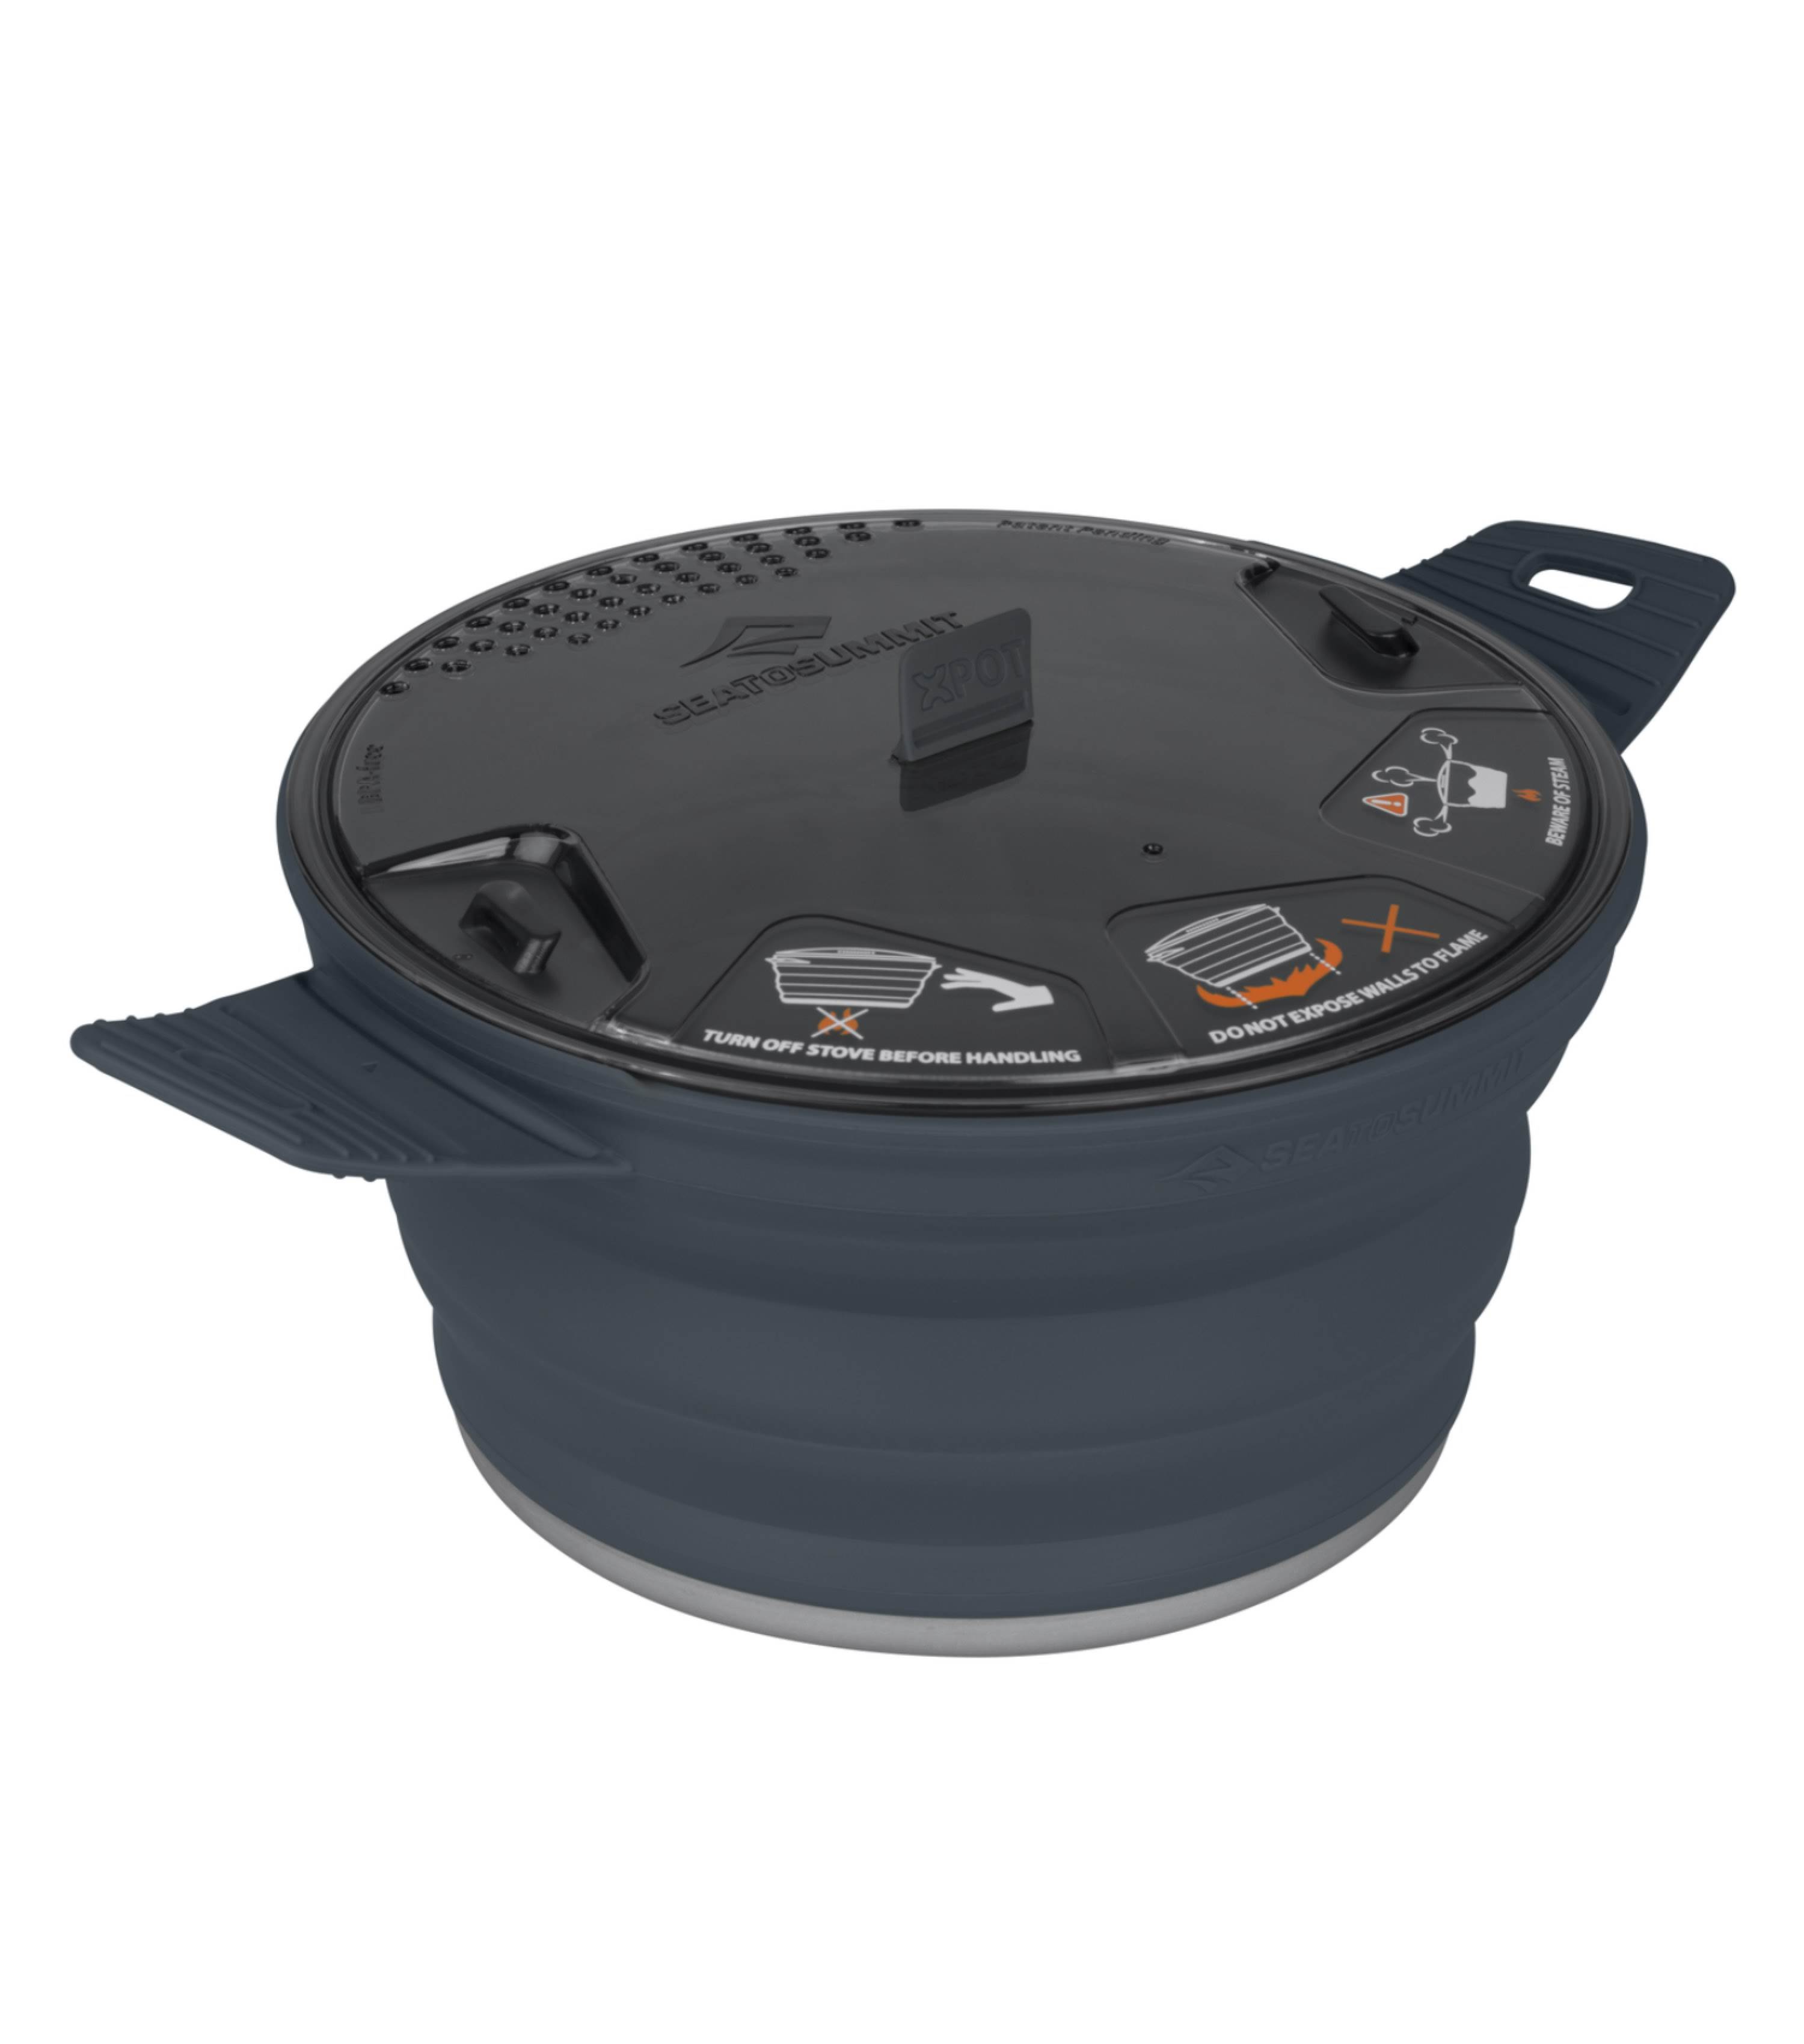 Sea to Summit X-Pot 4L Collapsible Cooking Pot by Sea to Summit